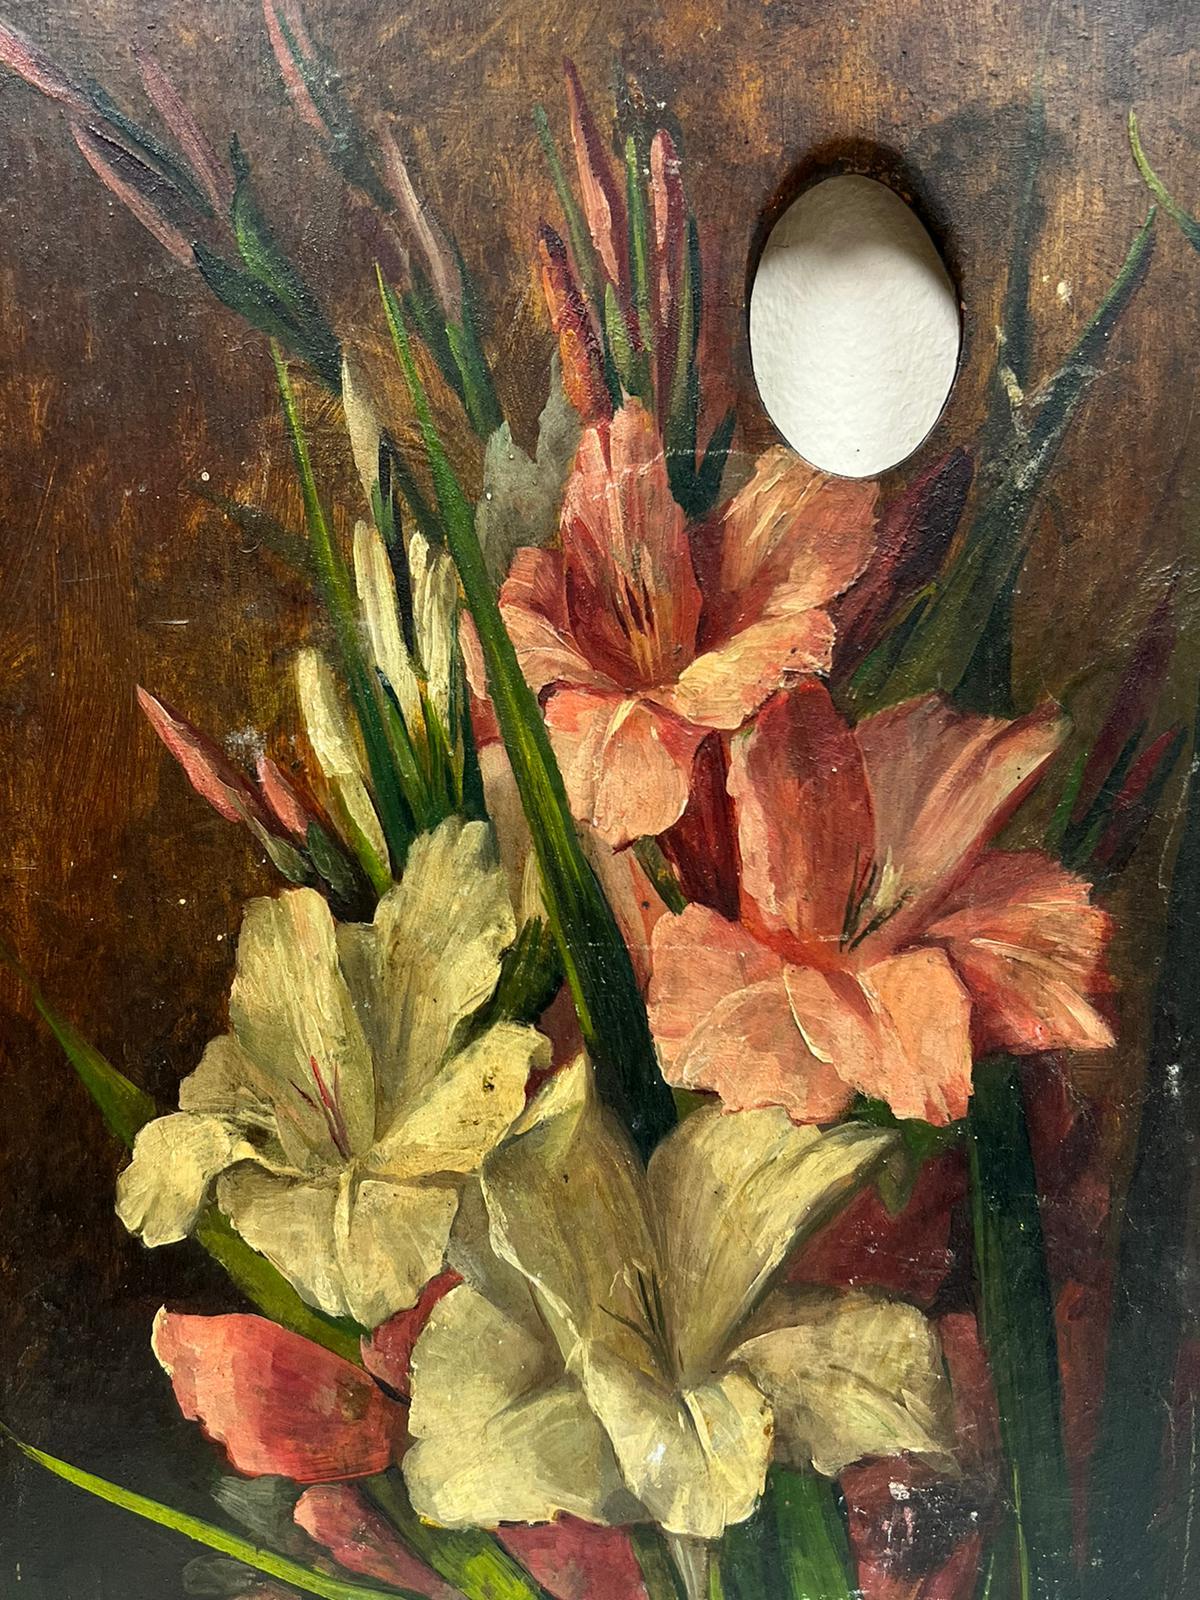 Antique French Artists Wooden Palette painted with Flowers Still Life - Painting by French School